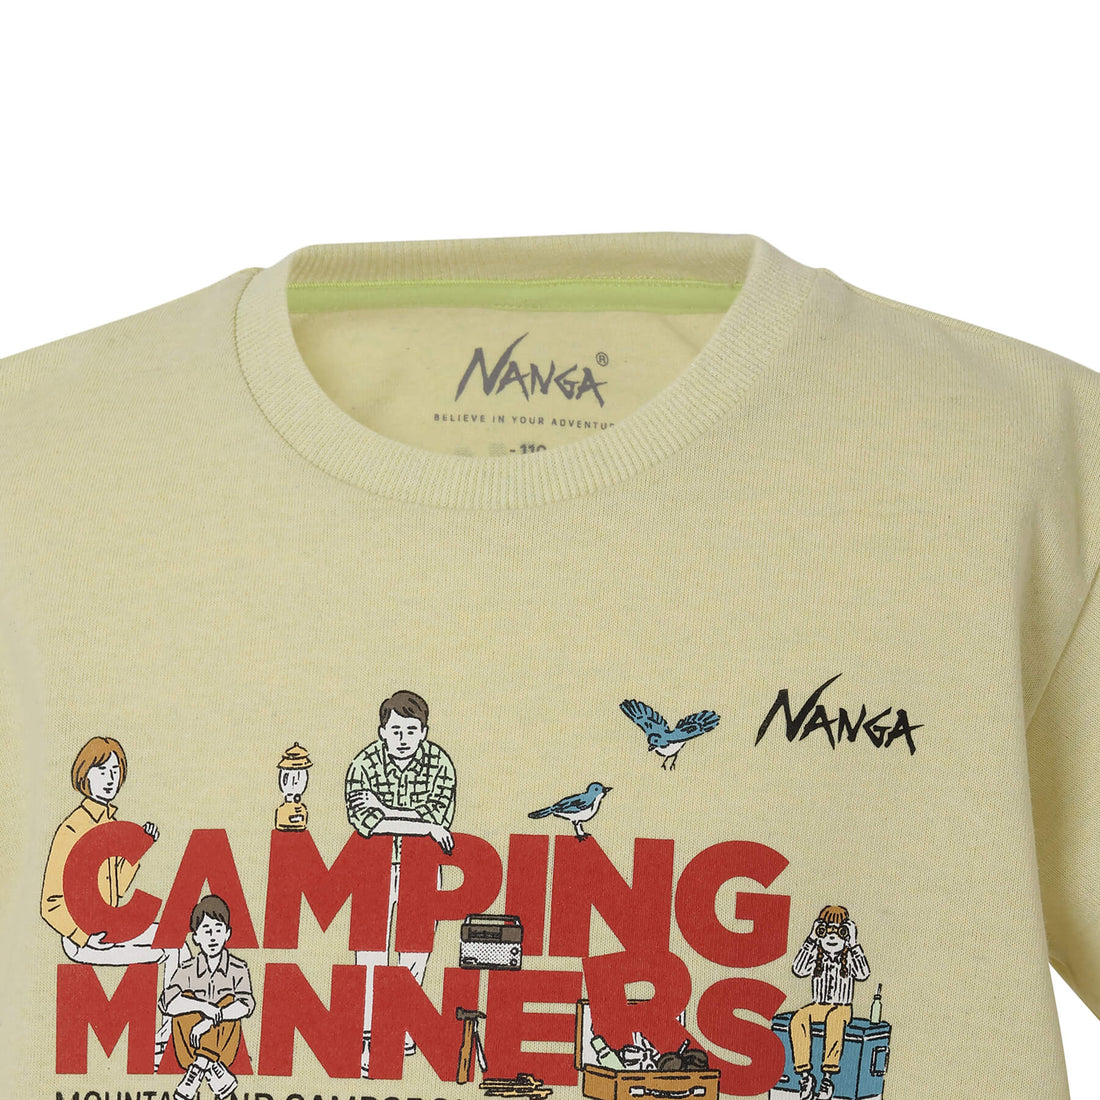 ECO HYBRID CAMPING MANNERS SOAP BUBBLES KIDS TEE / エコハイブリッド キャンピングマナー ソープバブル キッズティー(キッズ)